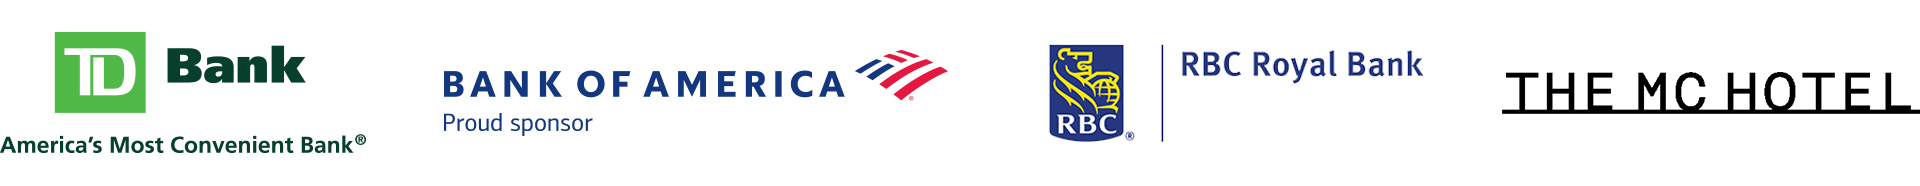 Funder Logos from left to right: TD Bank, Bank of America, RBC Royal Bank, and The MC Hotel